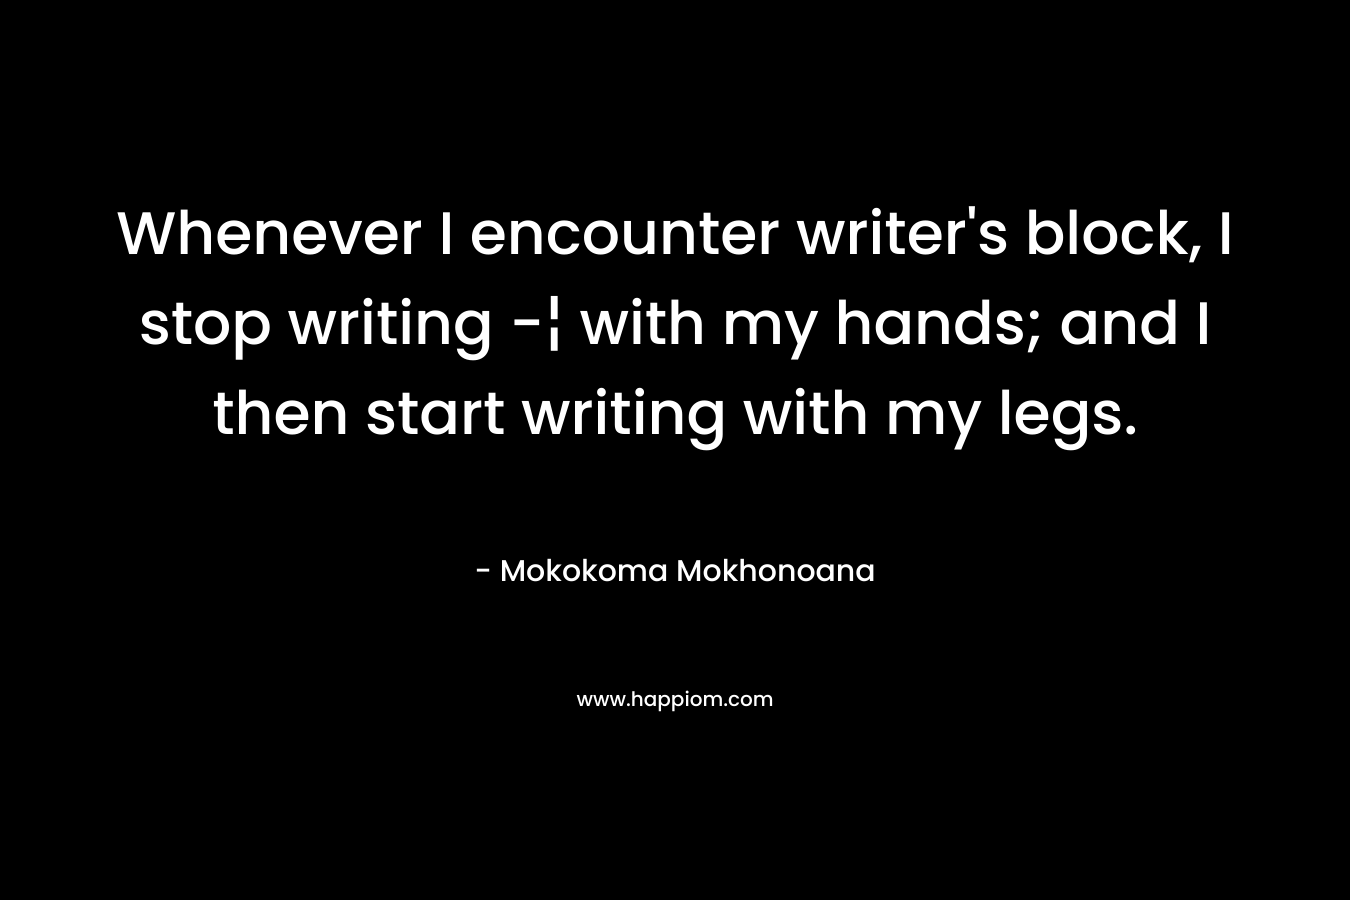 Whenever I encounter writer's block, I stop writing -¦ with my hands; and I then start writing with my legs.